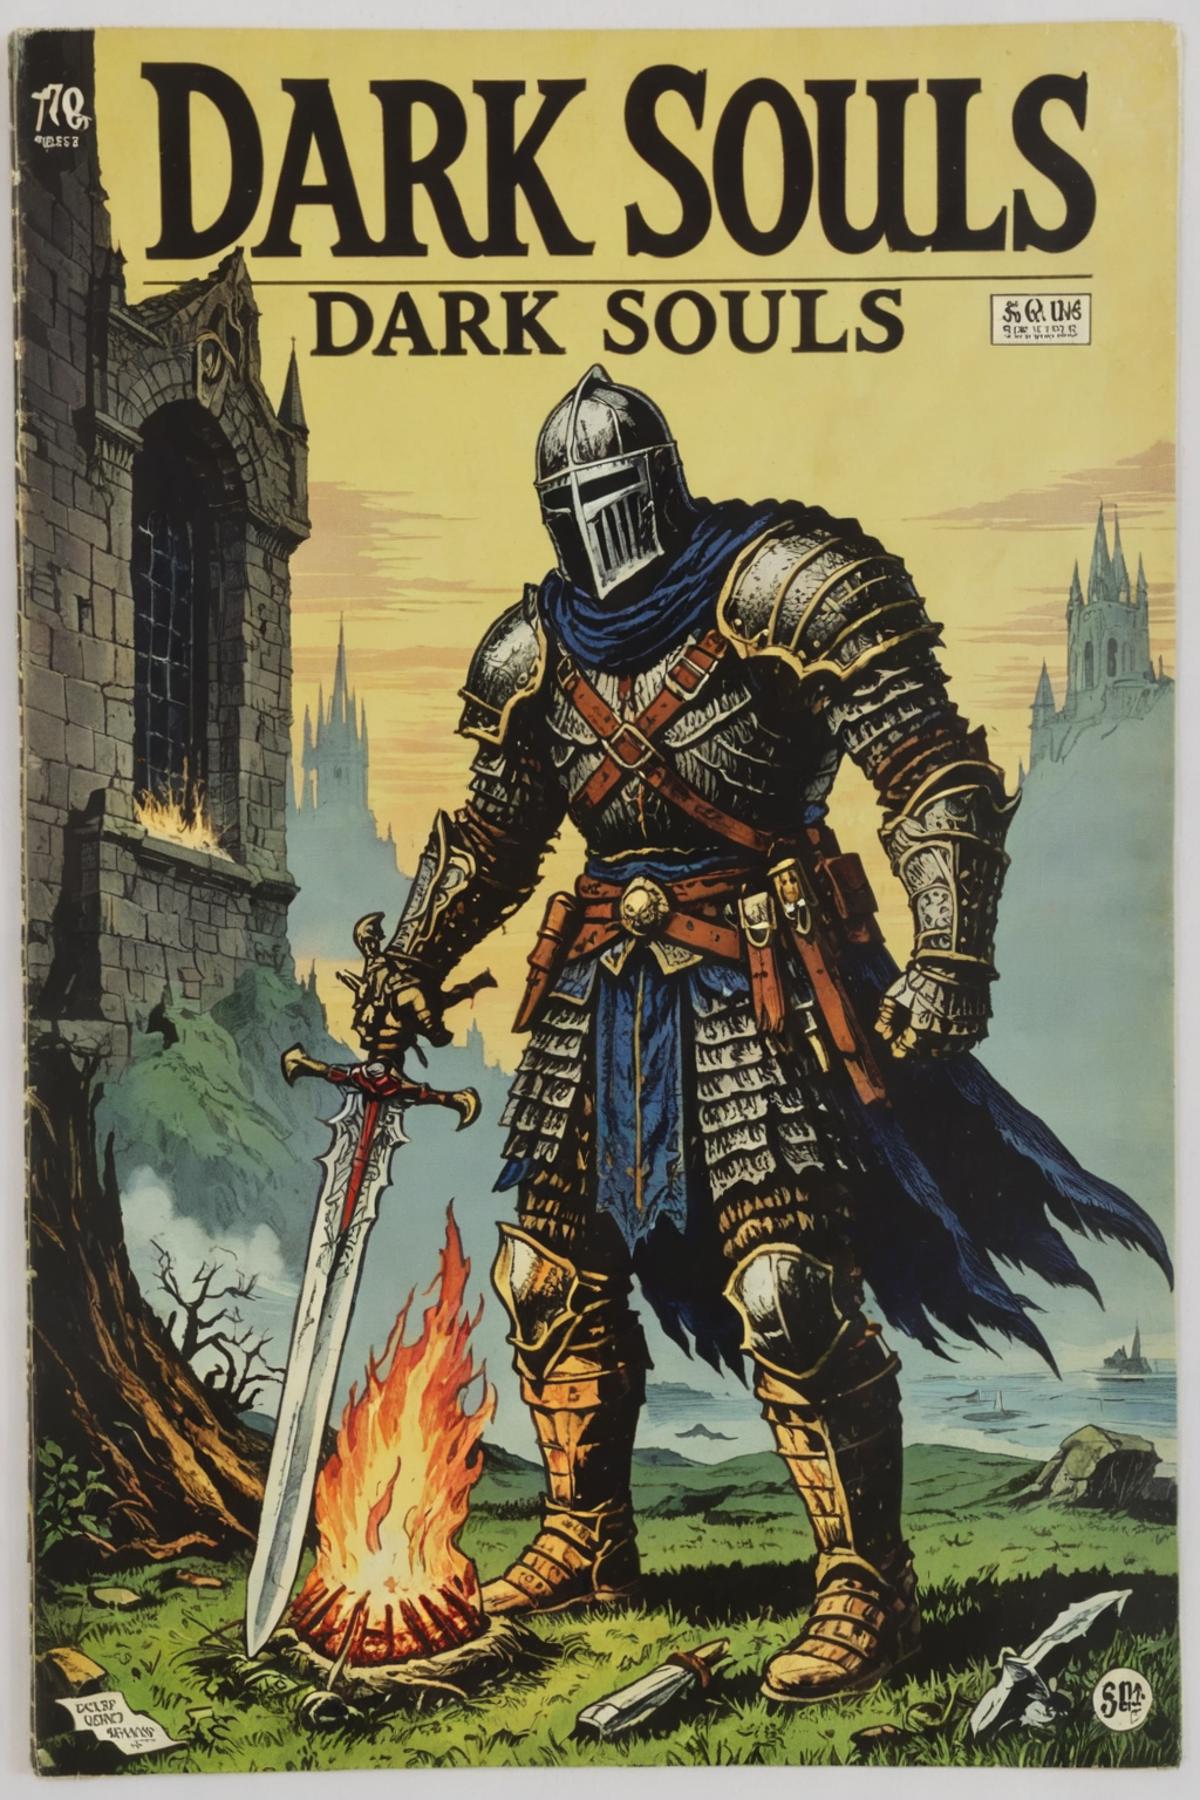 A Dark Souls advertisement featuring a knight in armor holding a sword.